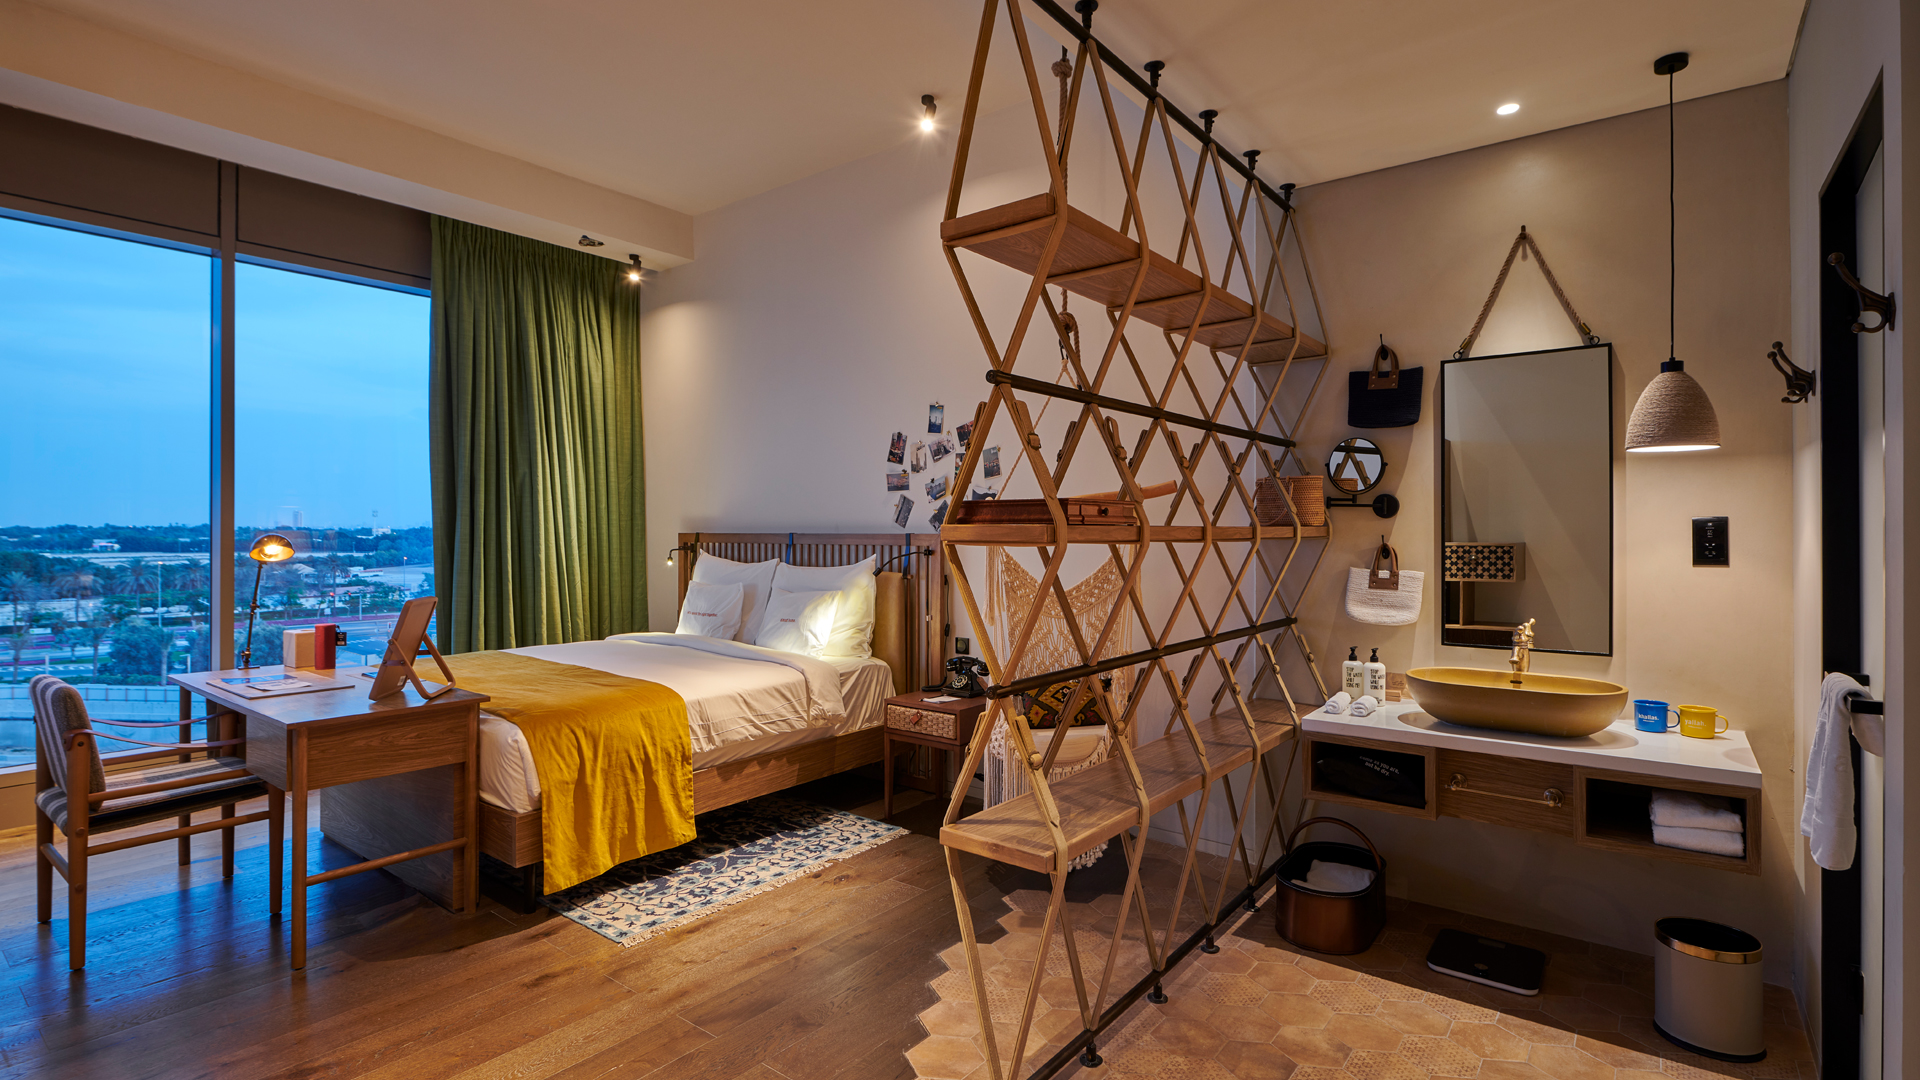 25hours Hotel One Central Dubai Bedroom Eclectic Characterful Interior Layered Lighting Scheme Designers Nulty